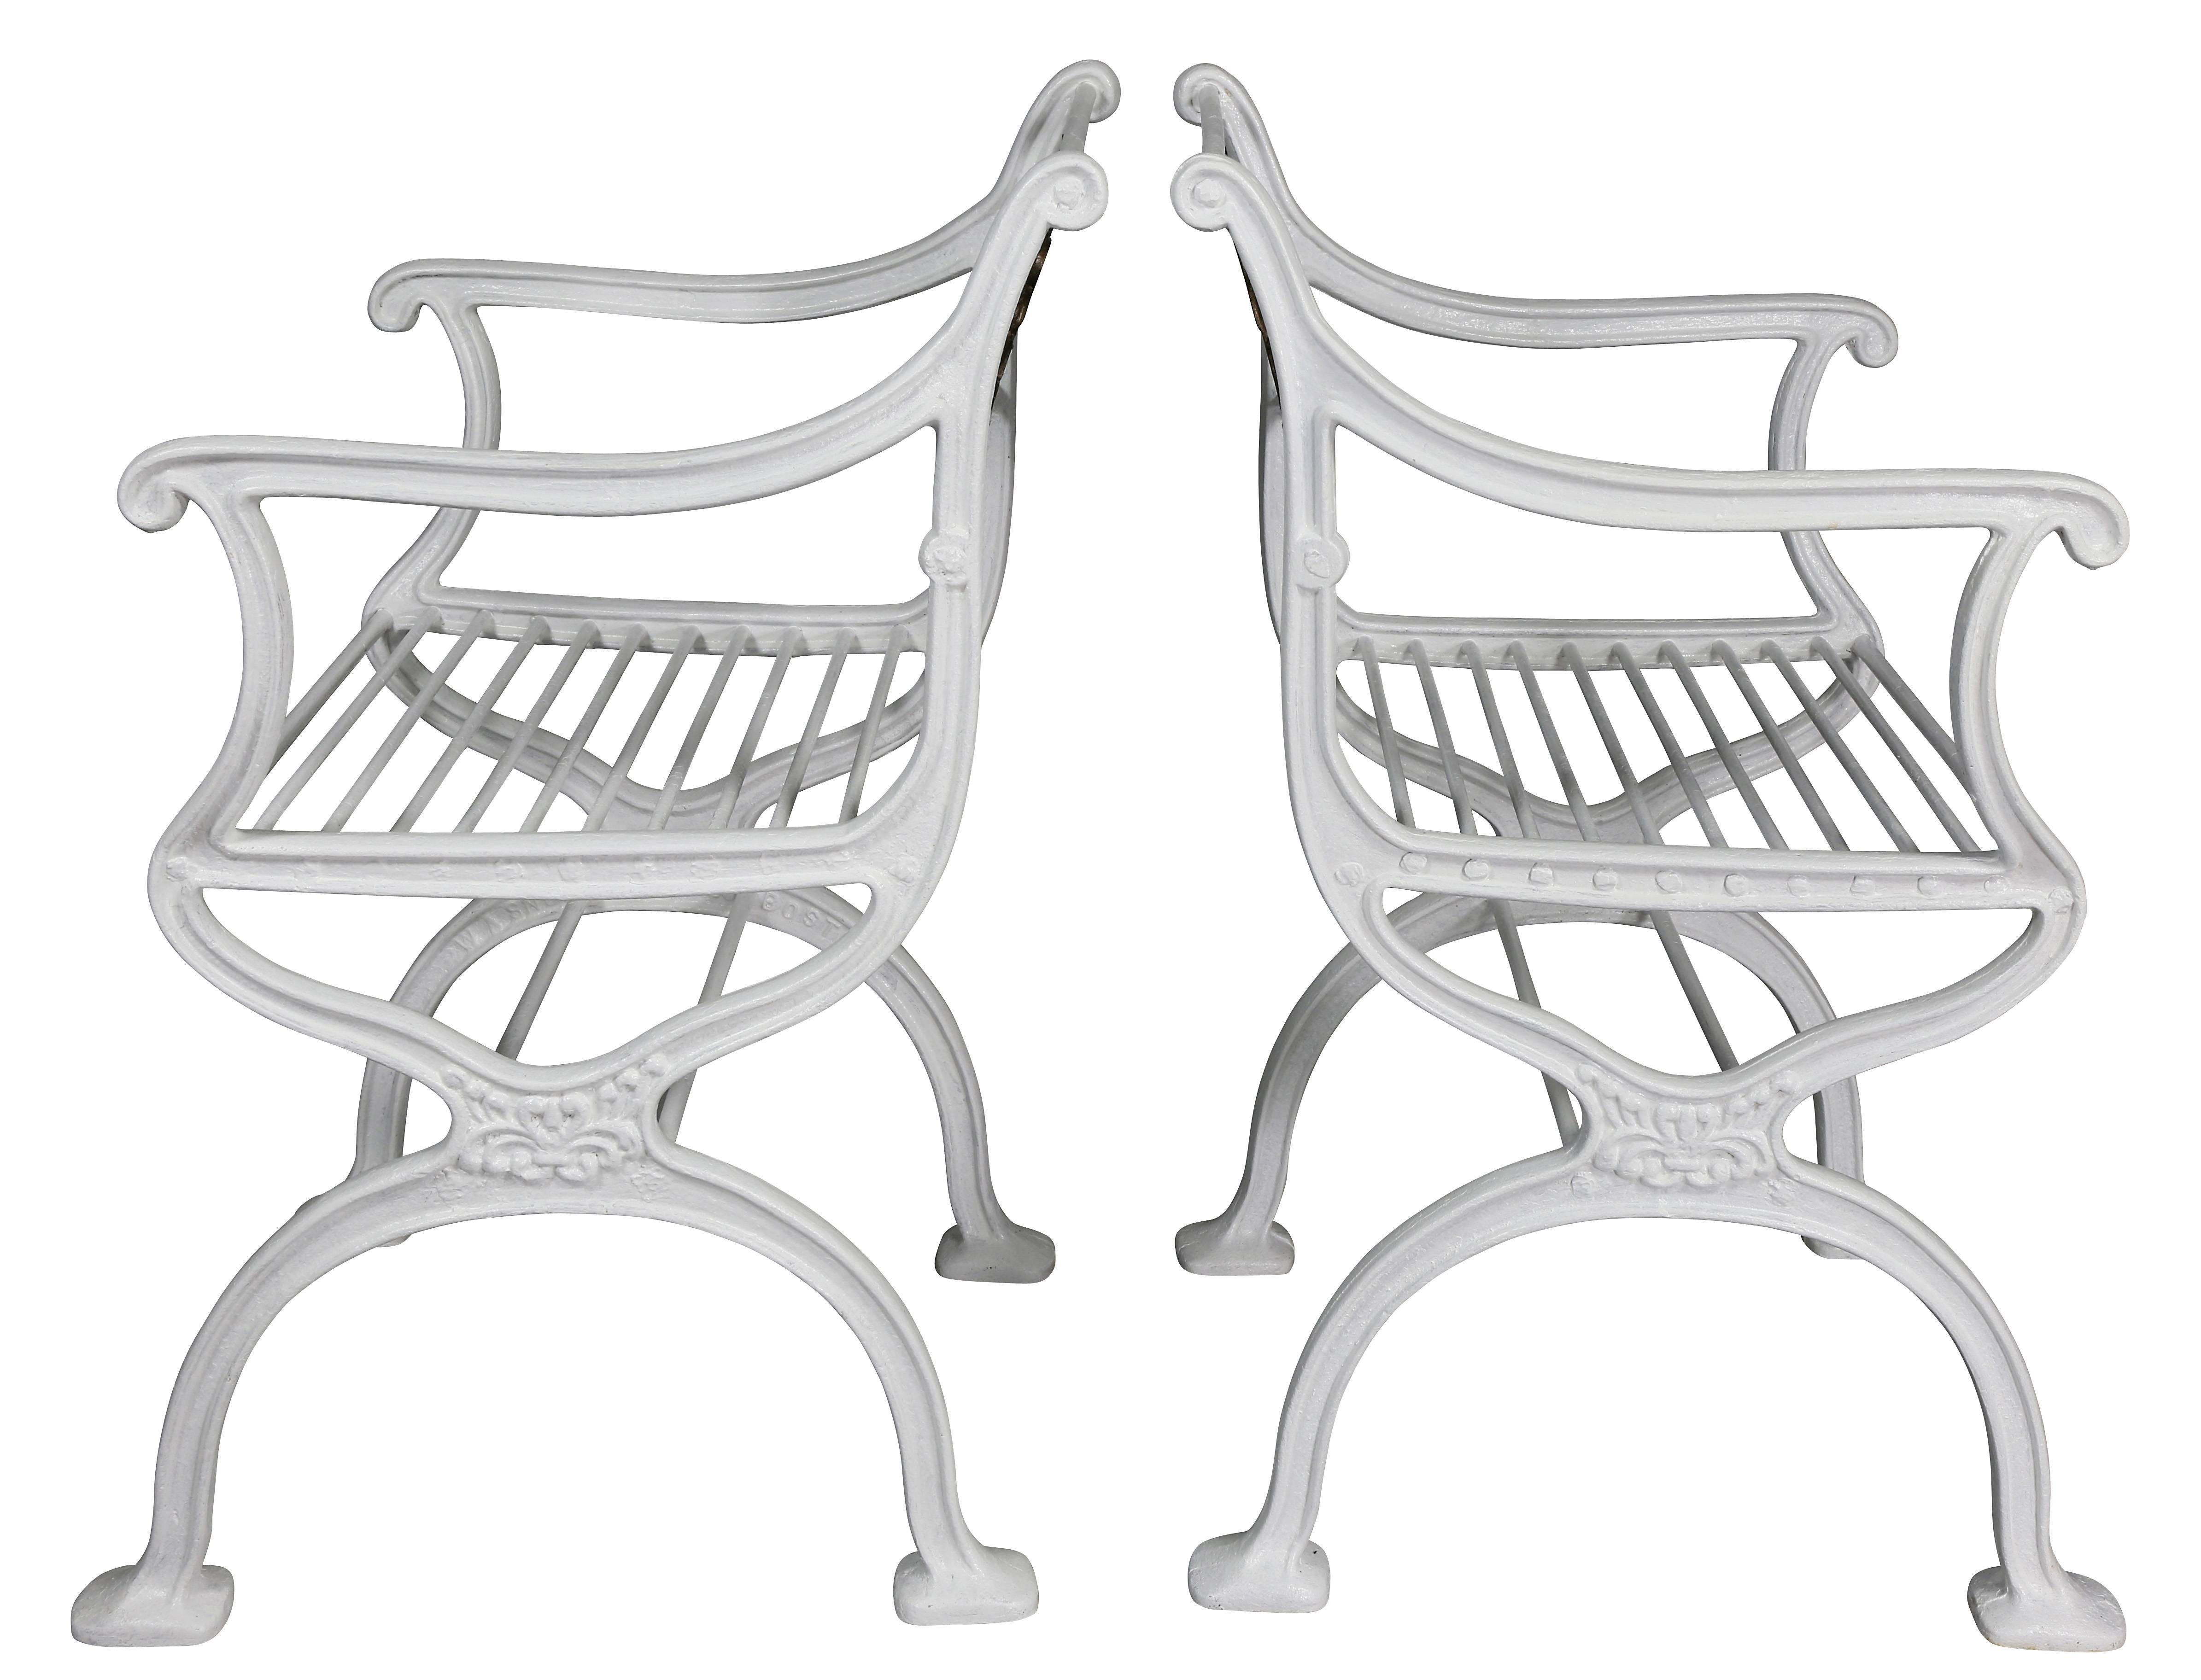 Early 20th Century Pair of American Cast Iron Garden Chairs by W.A Snow, Boston